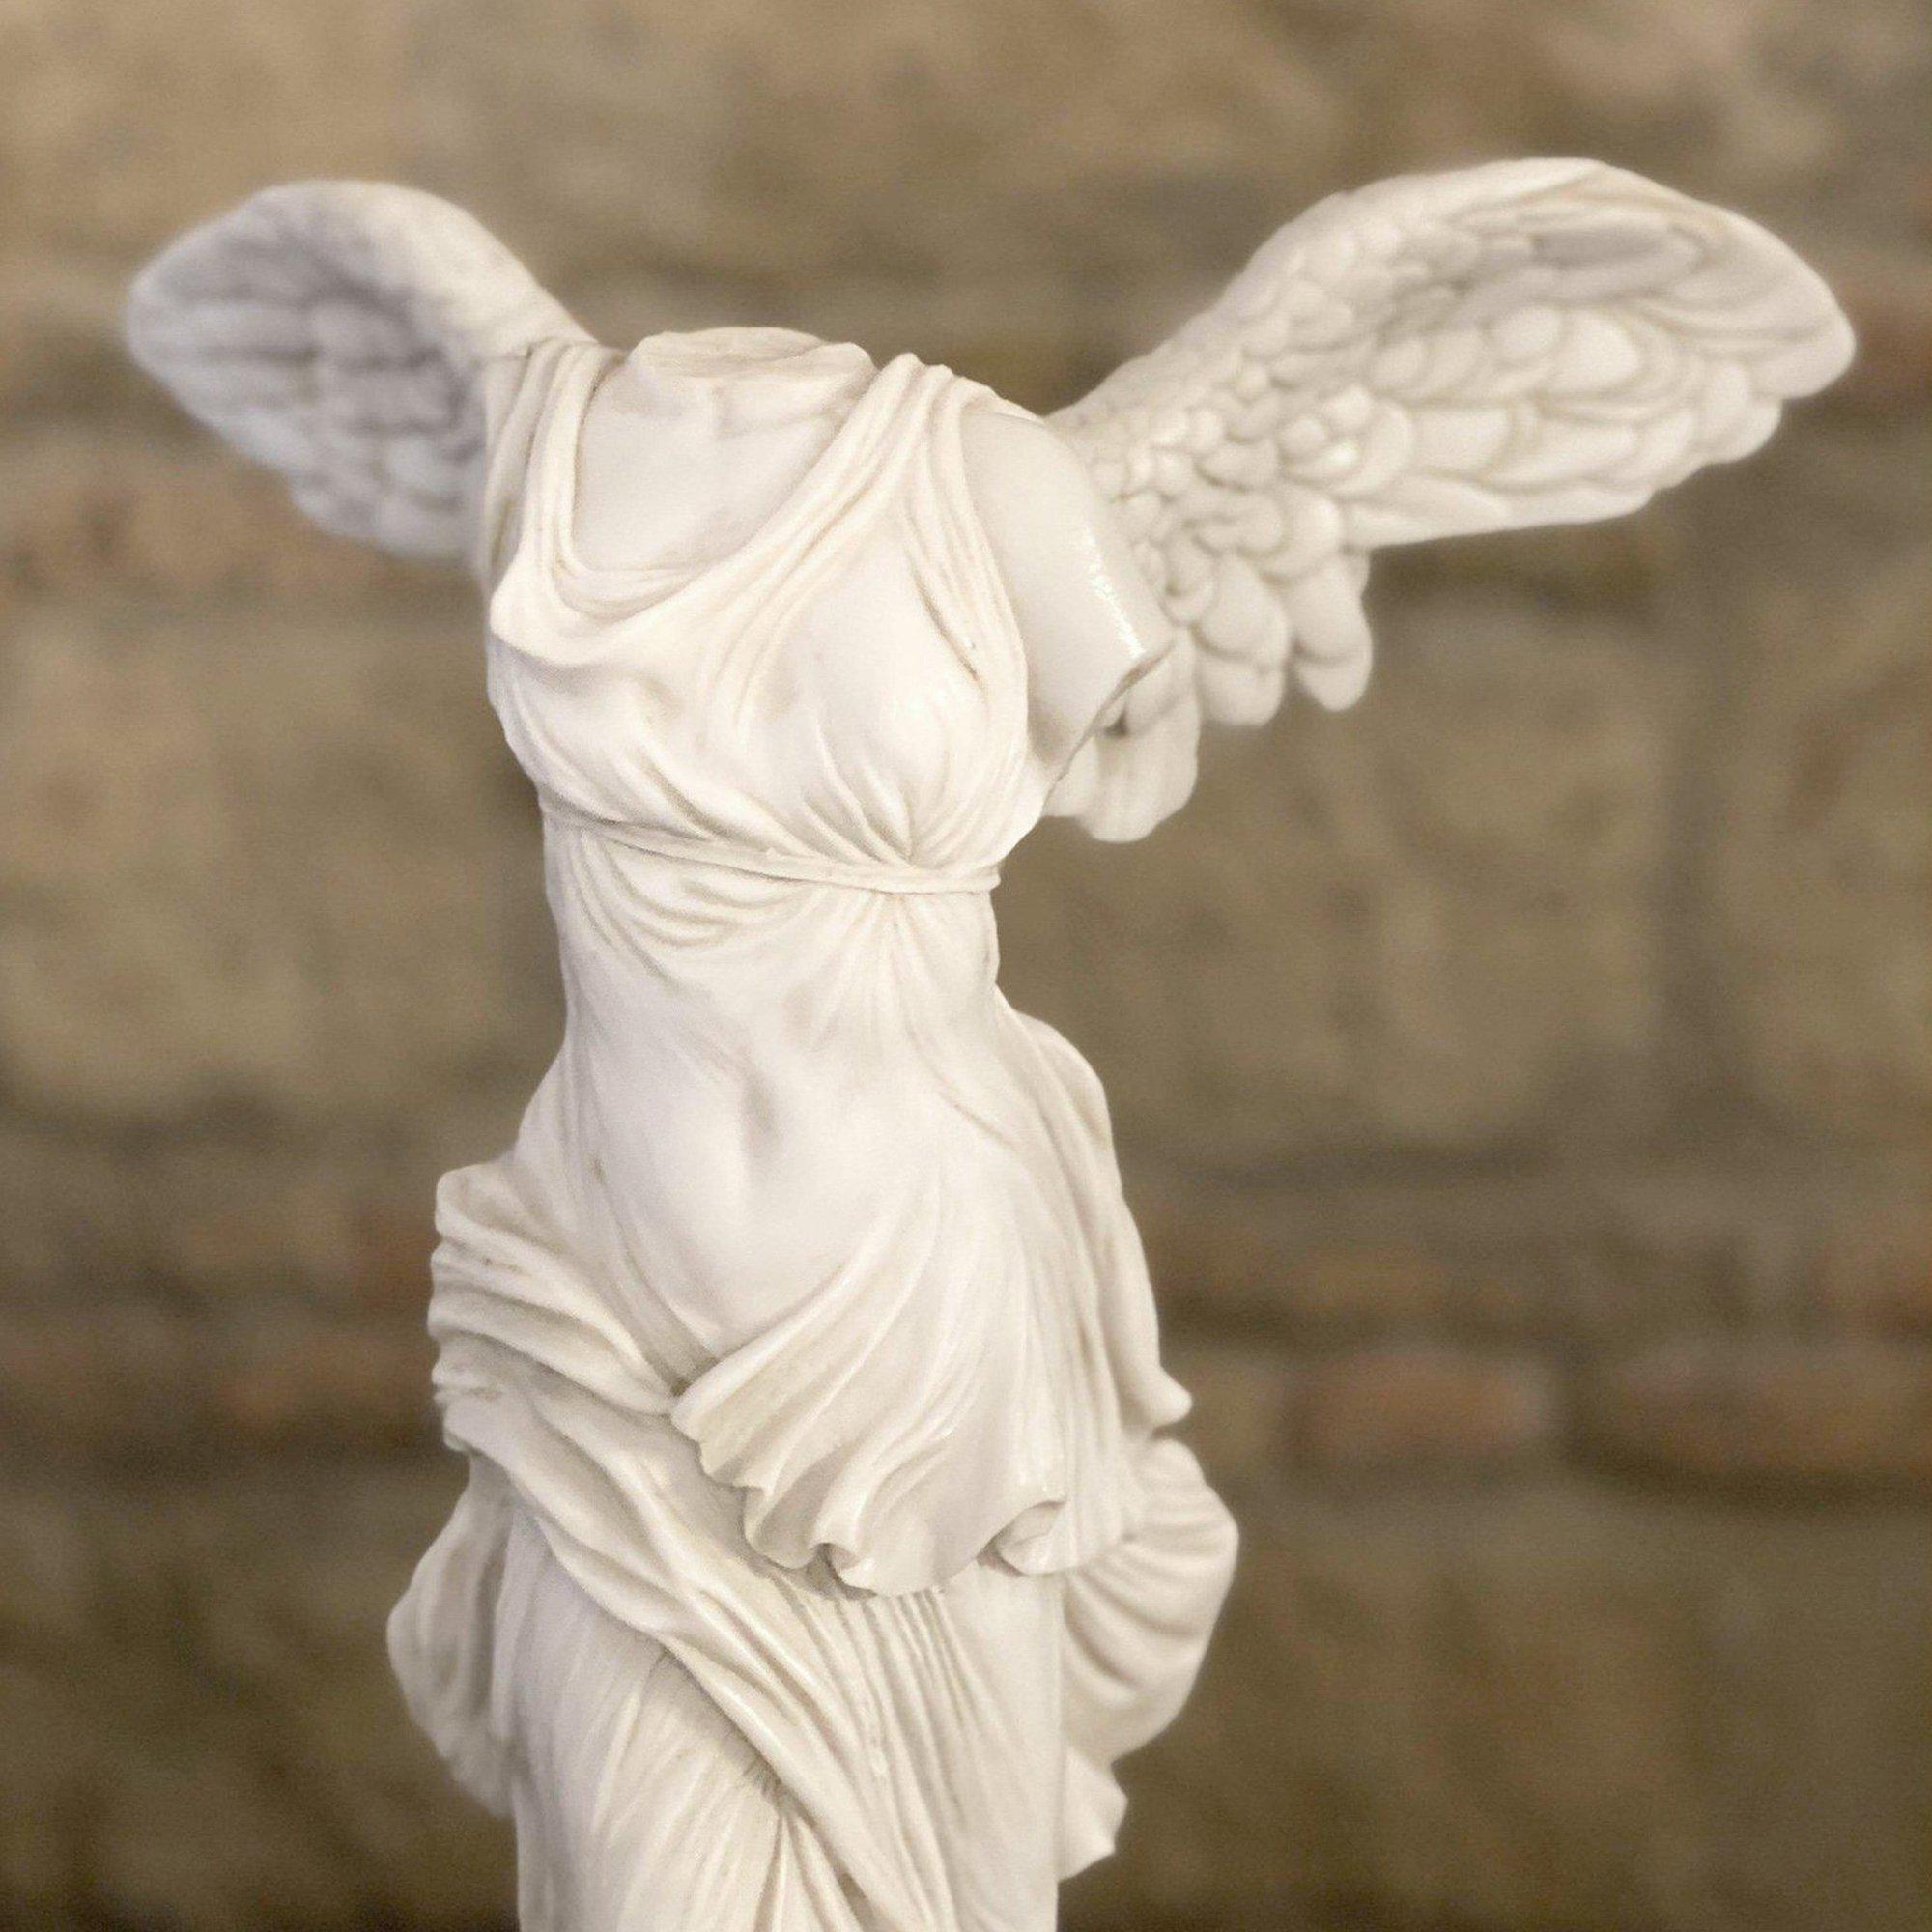 Nike of Samothrace Winged Victory statue for sale